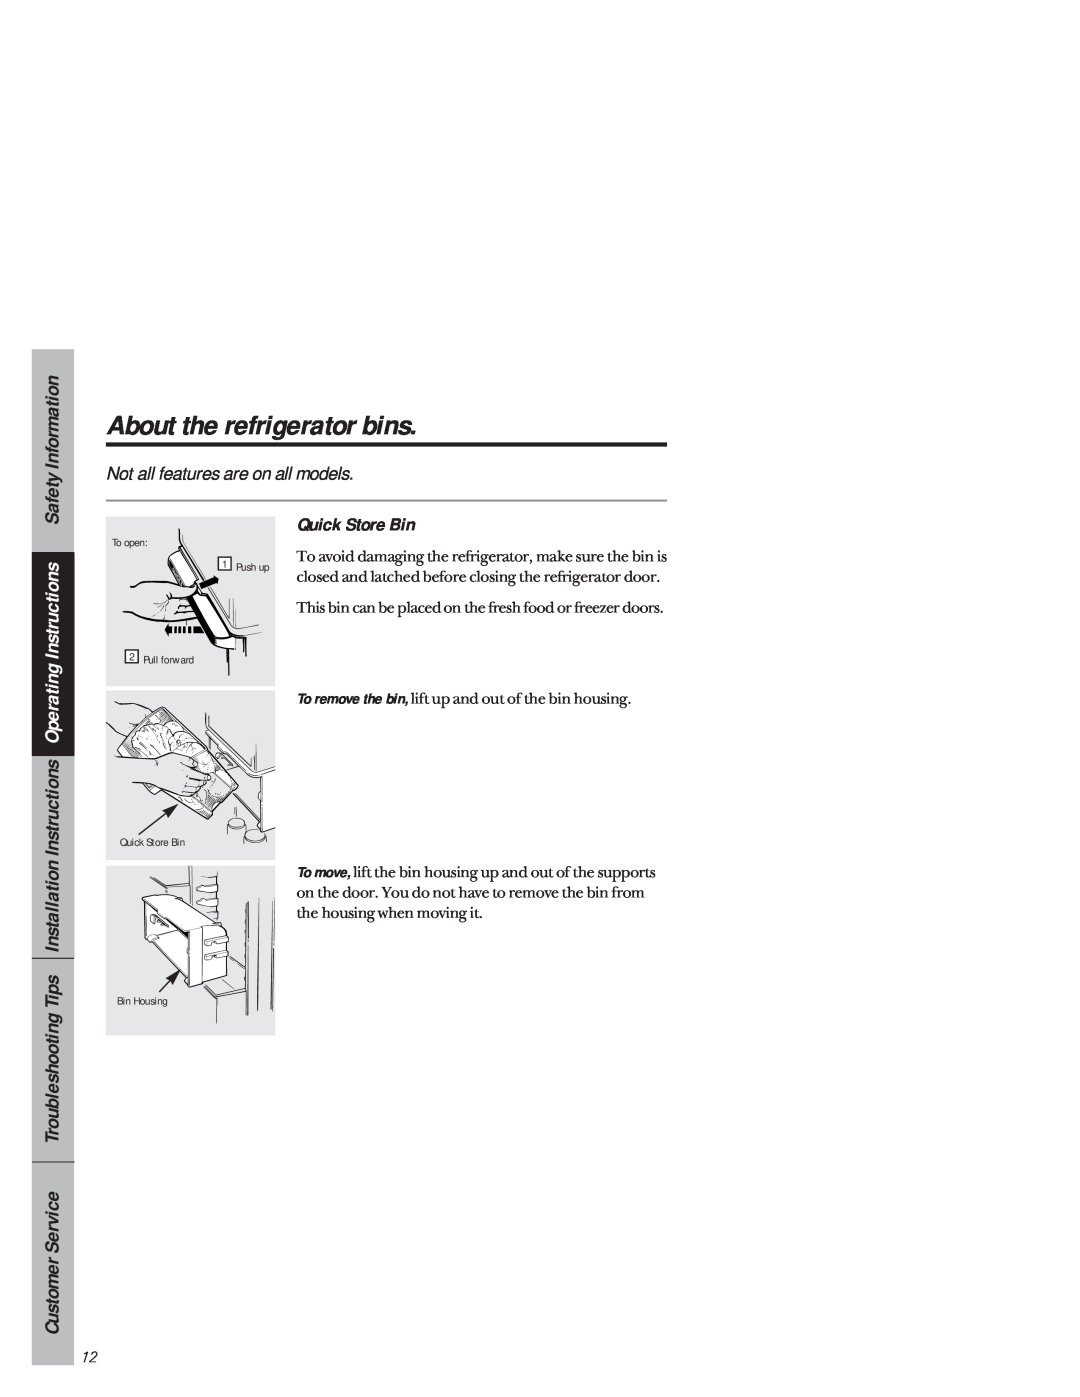 GE 1825 owner manual About the refrigerator bins, Safety Information, Quick Store Bin, Not all features are on all models 